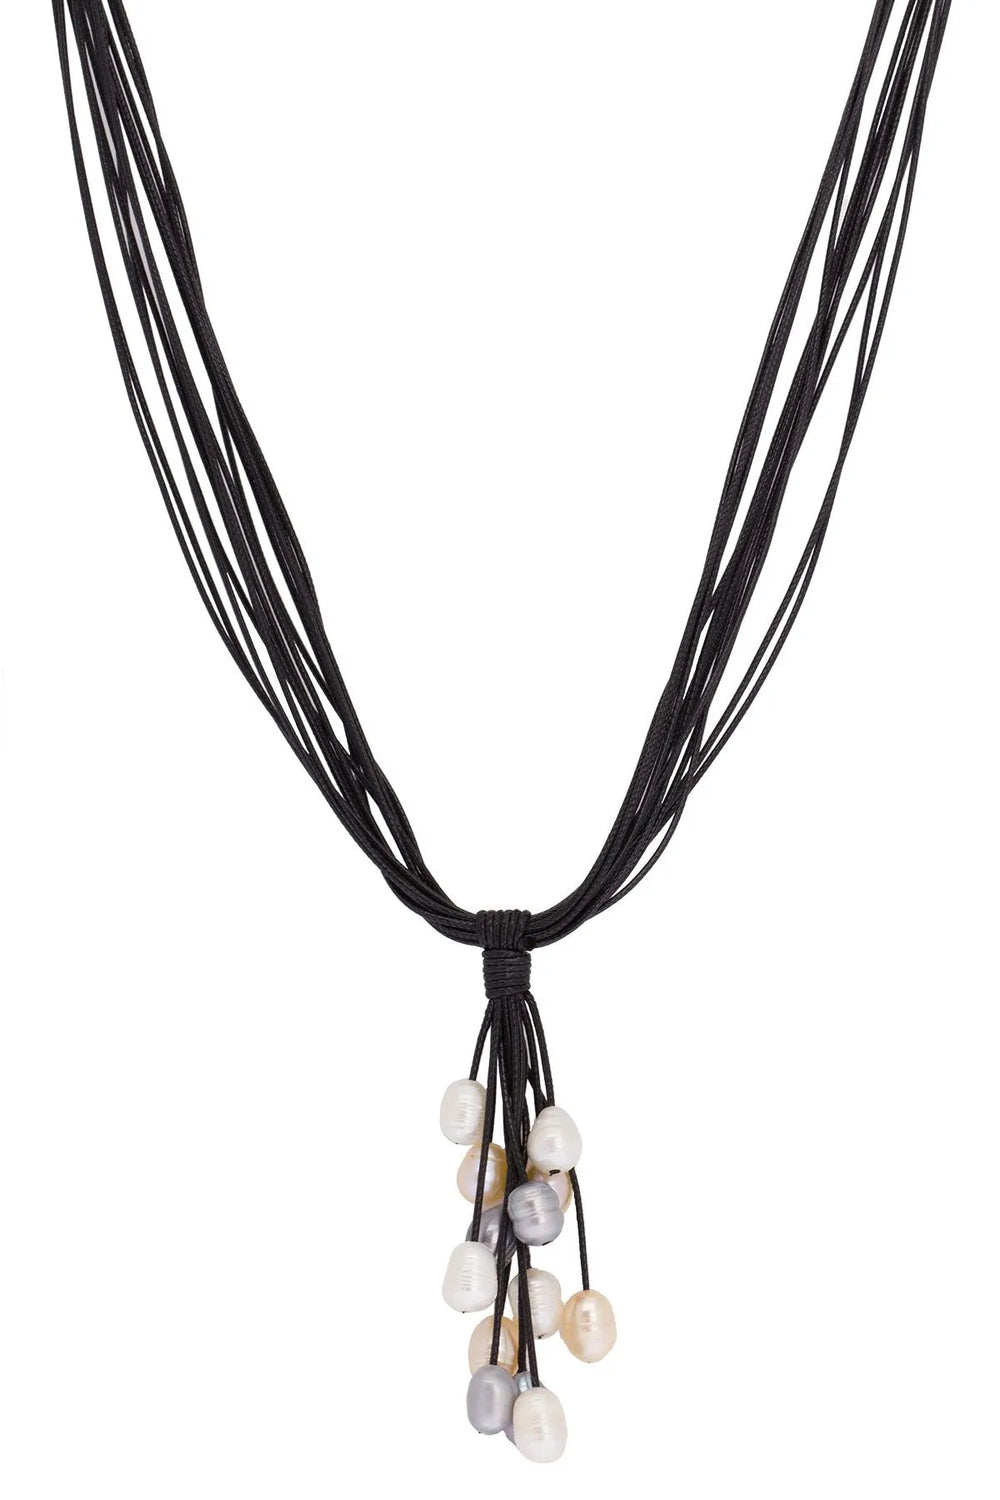 Tahitian Wax Corded Pearl Necklace Black